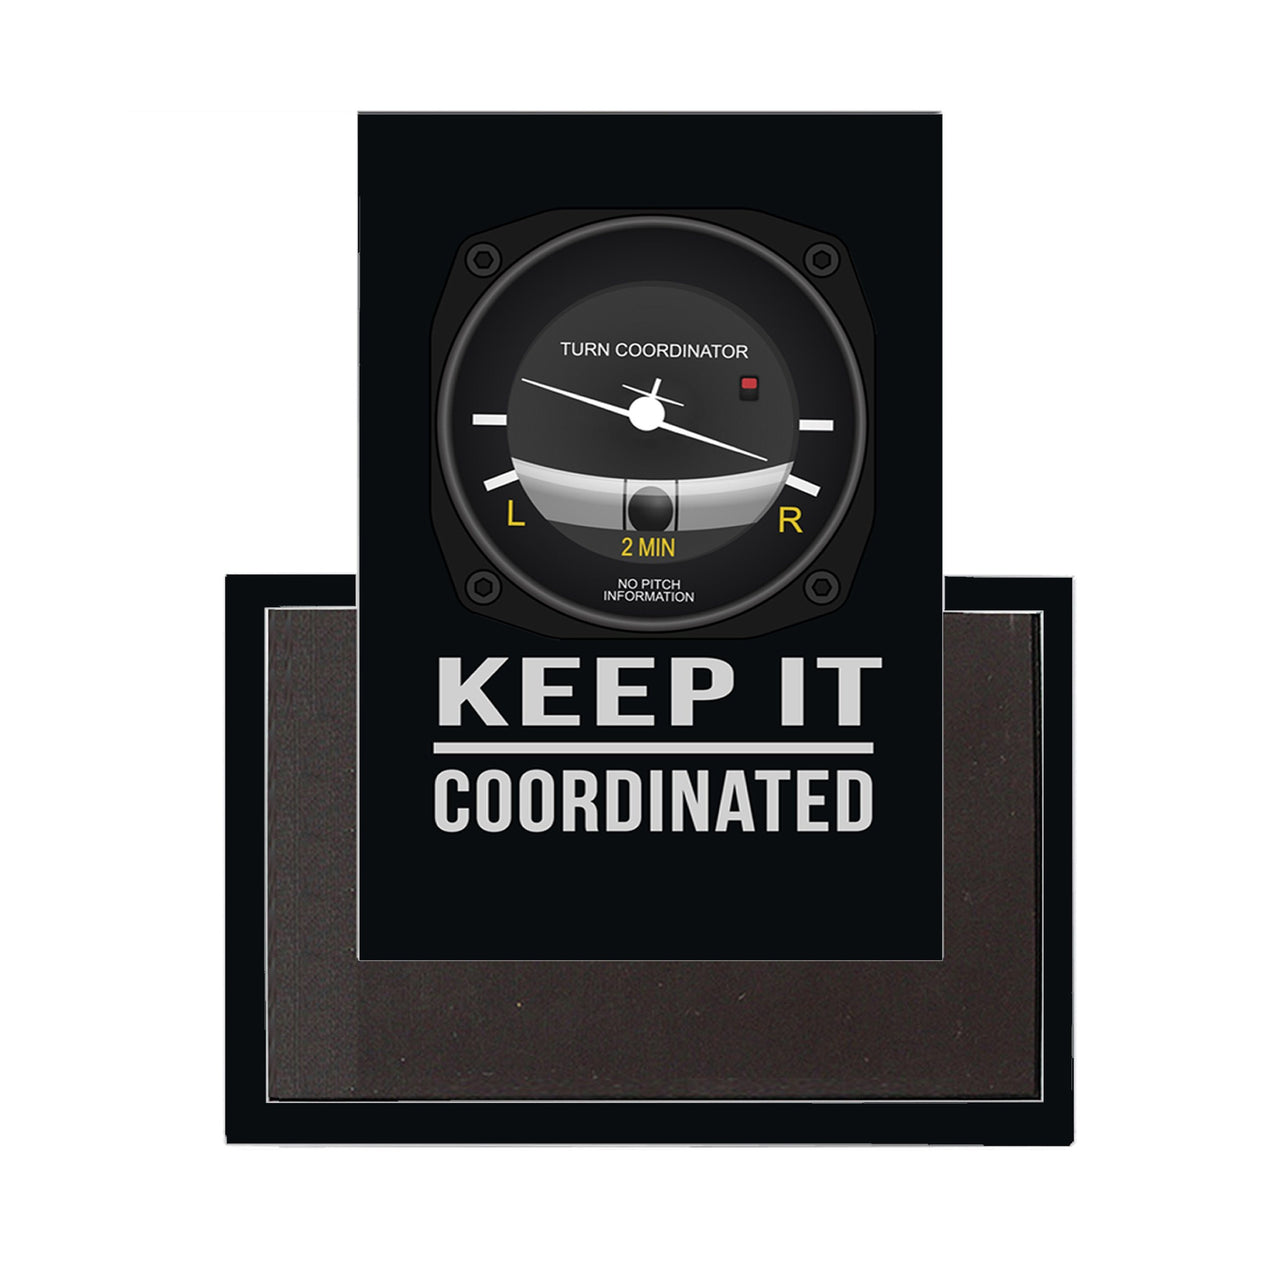 Keep It Coordinated Designed Magnet Pilot Eyes Store 